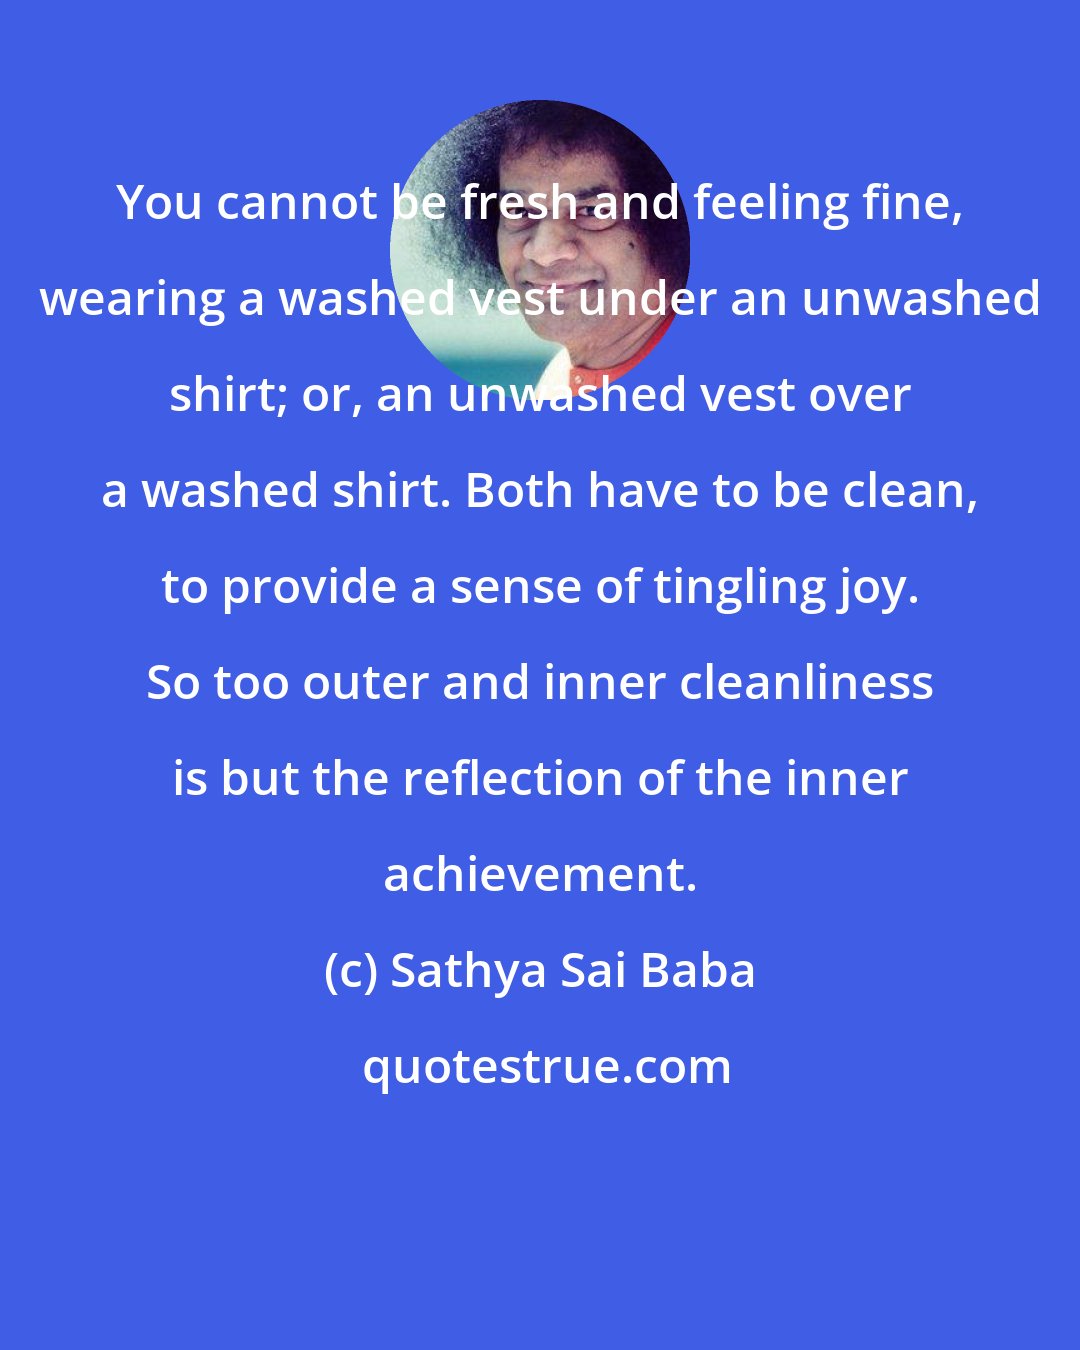 Sathya Sai Baba: You cannot be fresh and feeling fine, wearing a washed vest under an unwashed shirt; or, an unwashed vest over a washed shirt. Both have to be clean, to provide a sense of tingling joy. So too outer and inner cleanliness is but the reflection of the inner achievement.